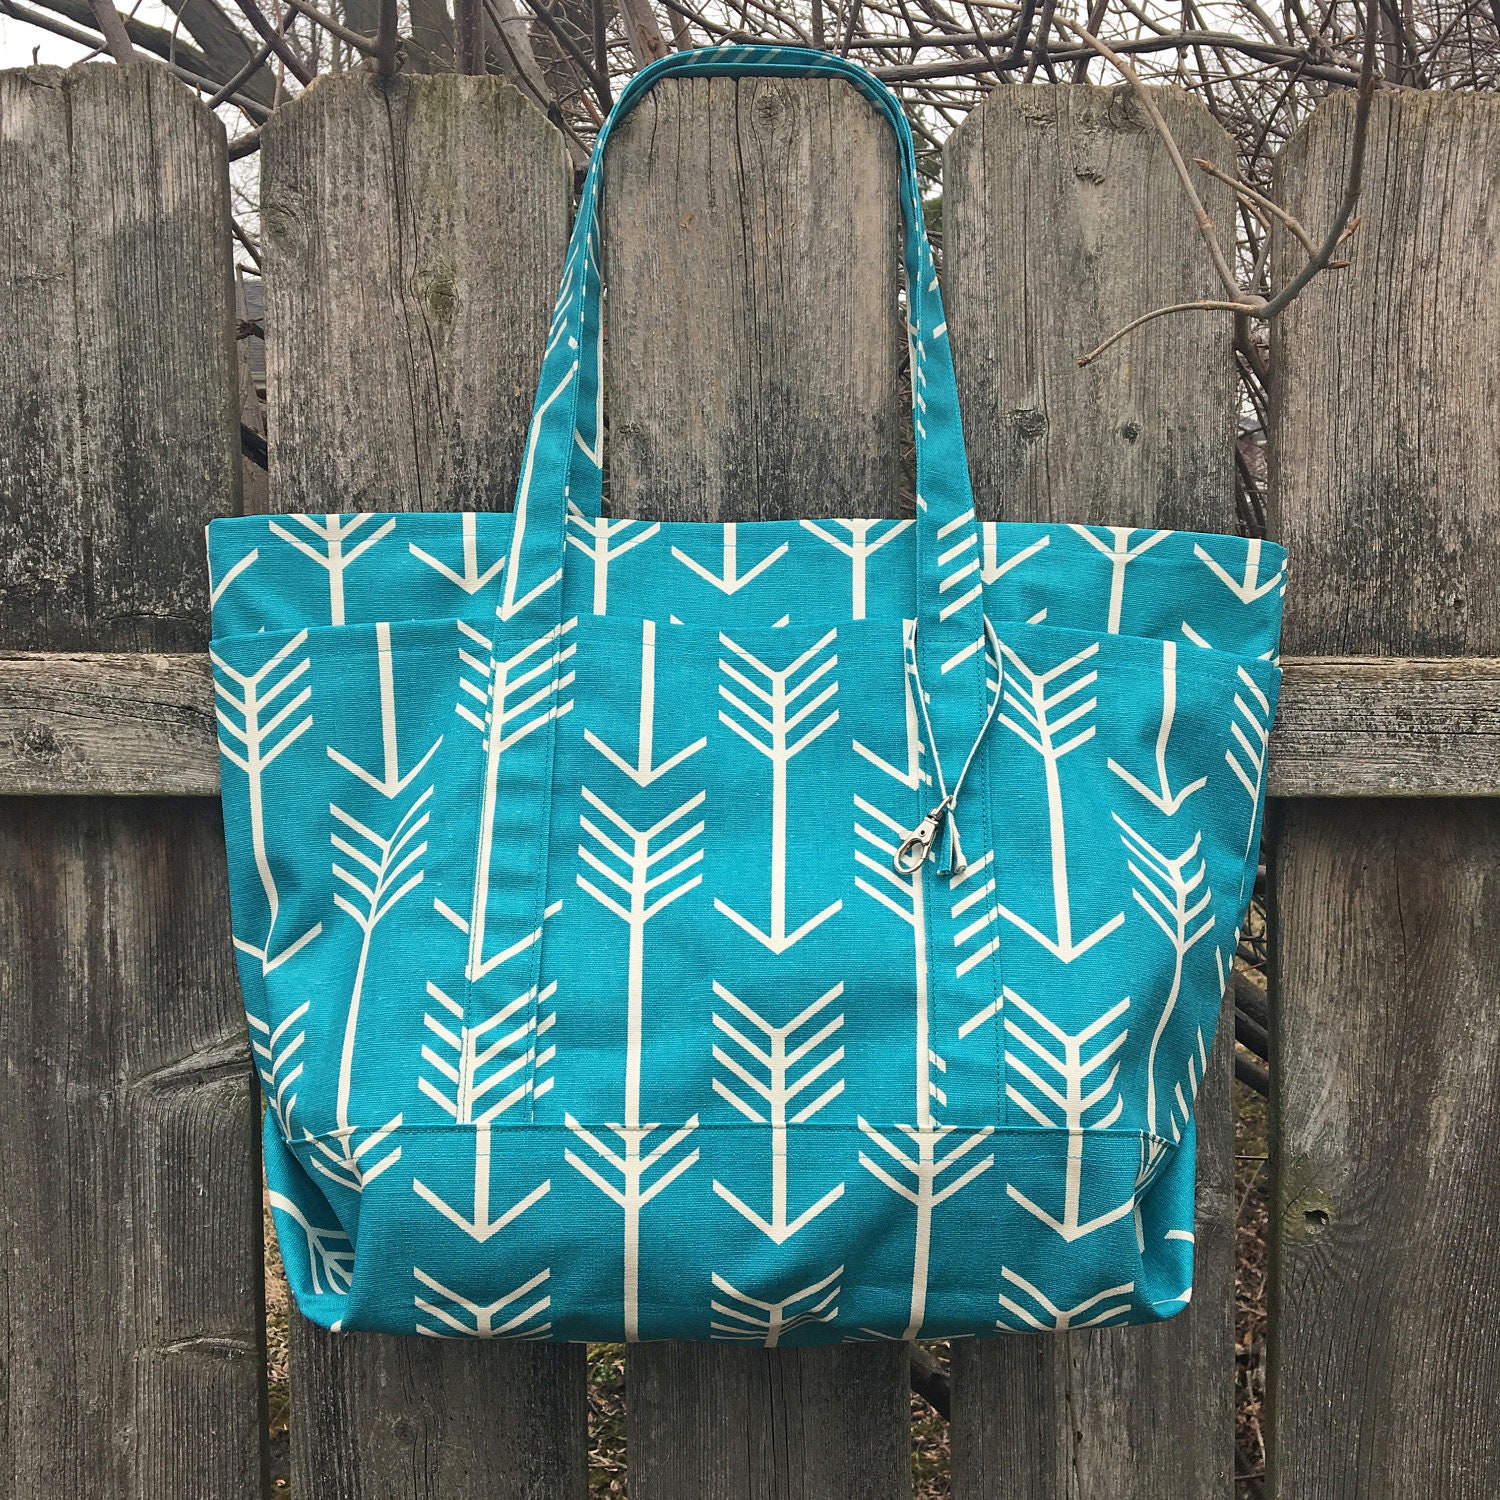 PDF Tote Bag Beach Bag Pattern Tutorial Features 6 Pockets - Etsy